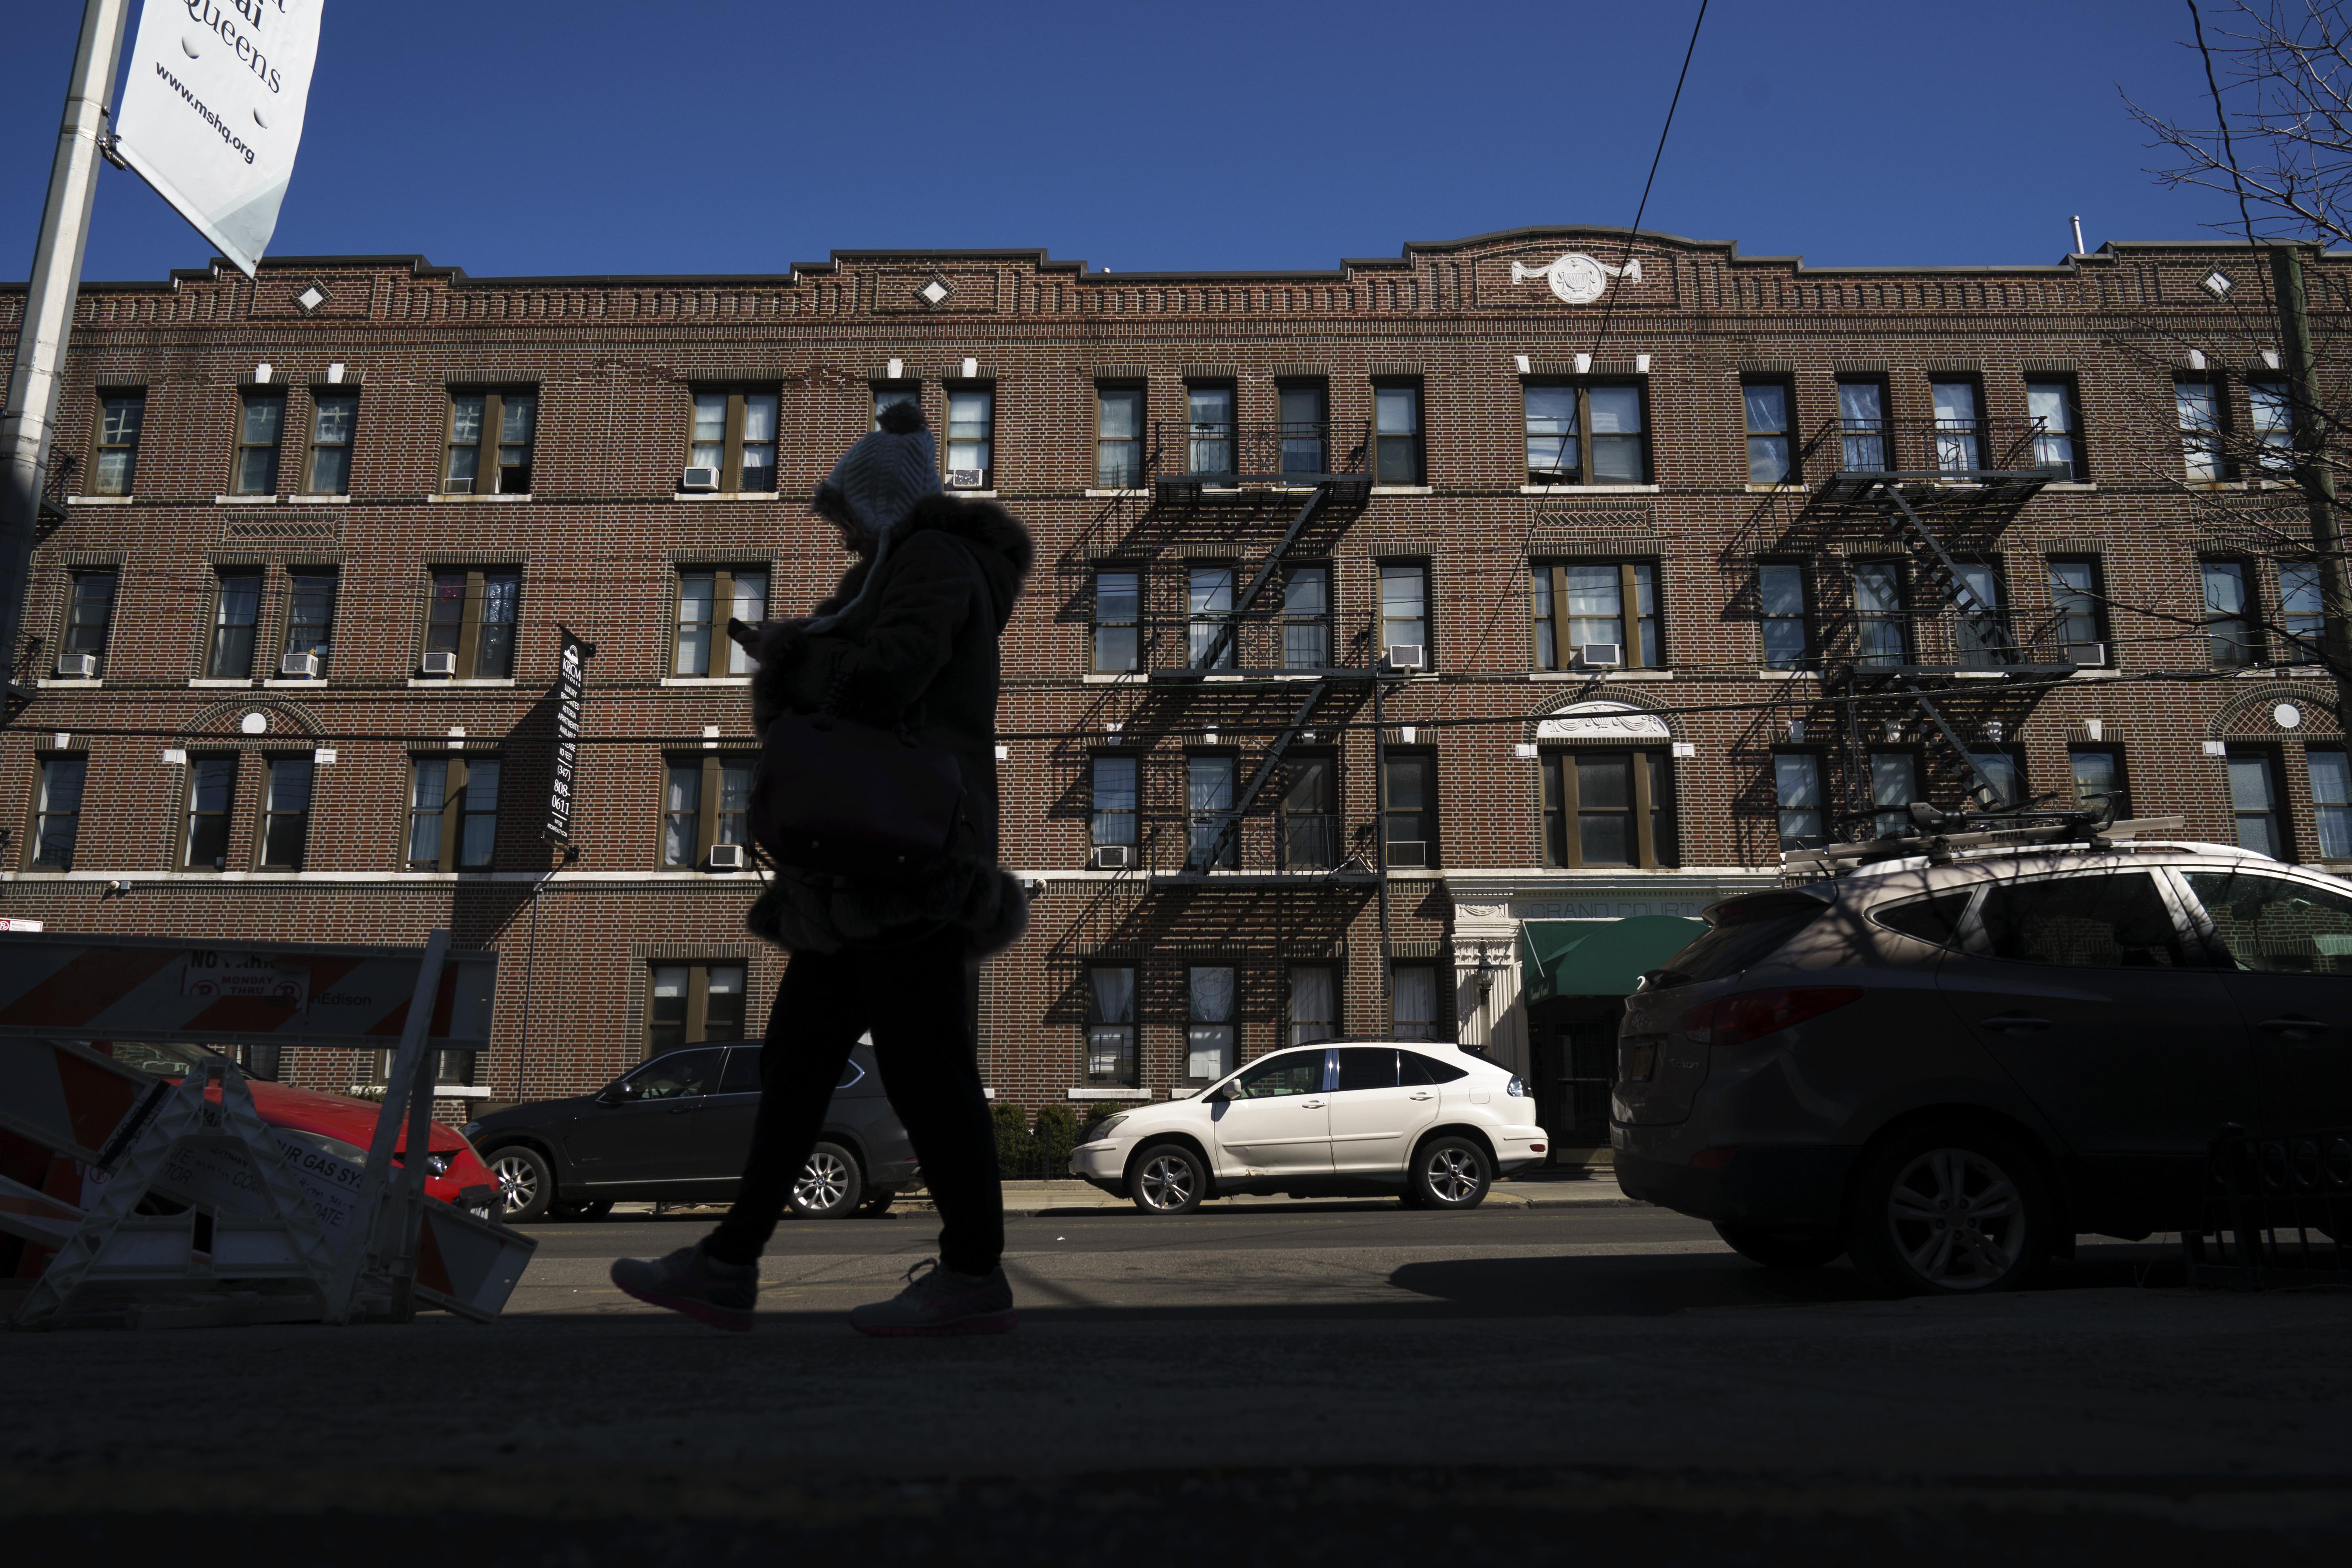 An apartment building formerly owned by the Kushner Companies, run by the family of White House senior adviser Jared Kushner, stands in the Astoria neighborhood of Queens, March 19, 2018 in New York City. In dozens of rental buildings across New York City, the Kushner Companies filed false paperwork declaring that the buildings had zero rent-regulated tenants. The move allowed the company to push out rent-controlled tenants, raise rents and boost profits when it later sold the buildings. (Photo by Drew Angerer/Getty Images)